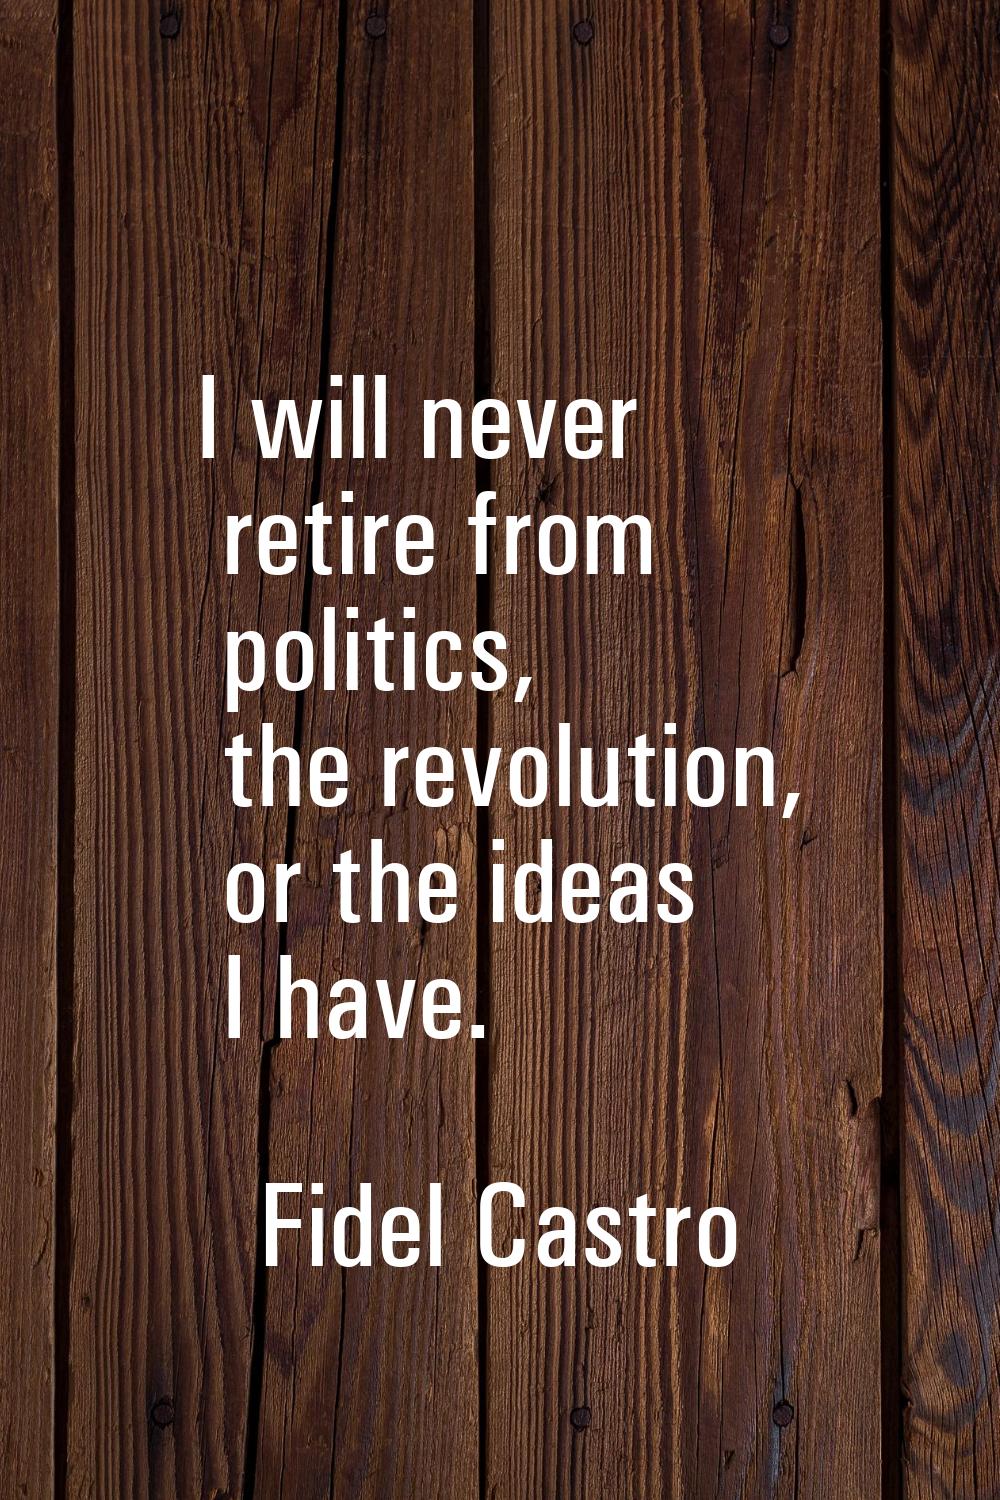 I will never retire from politics, the revolution, or the ideas I have.